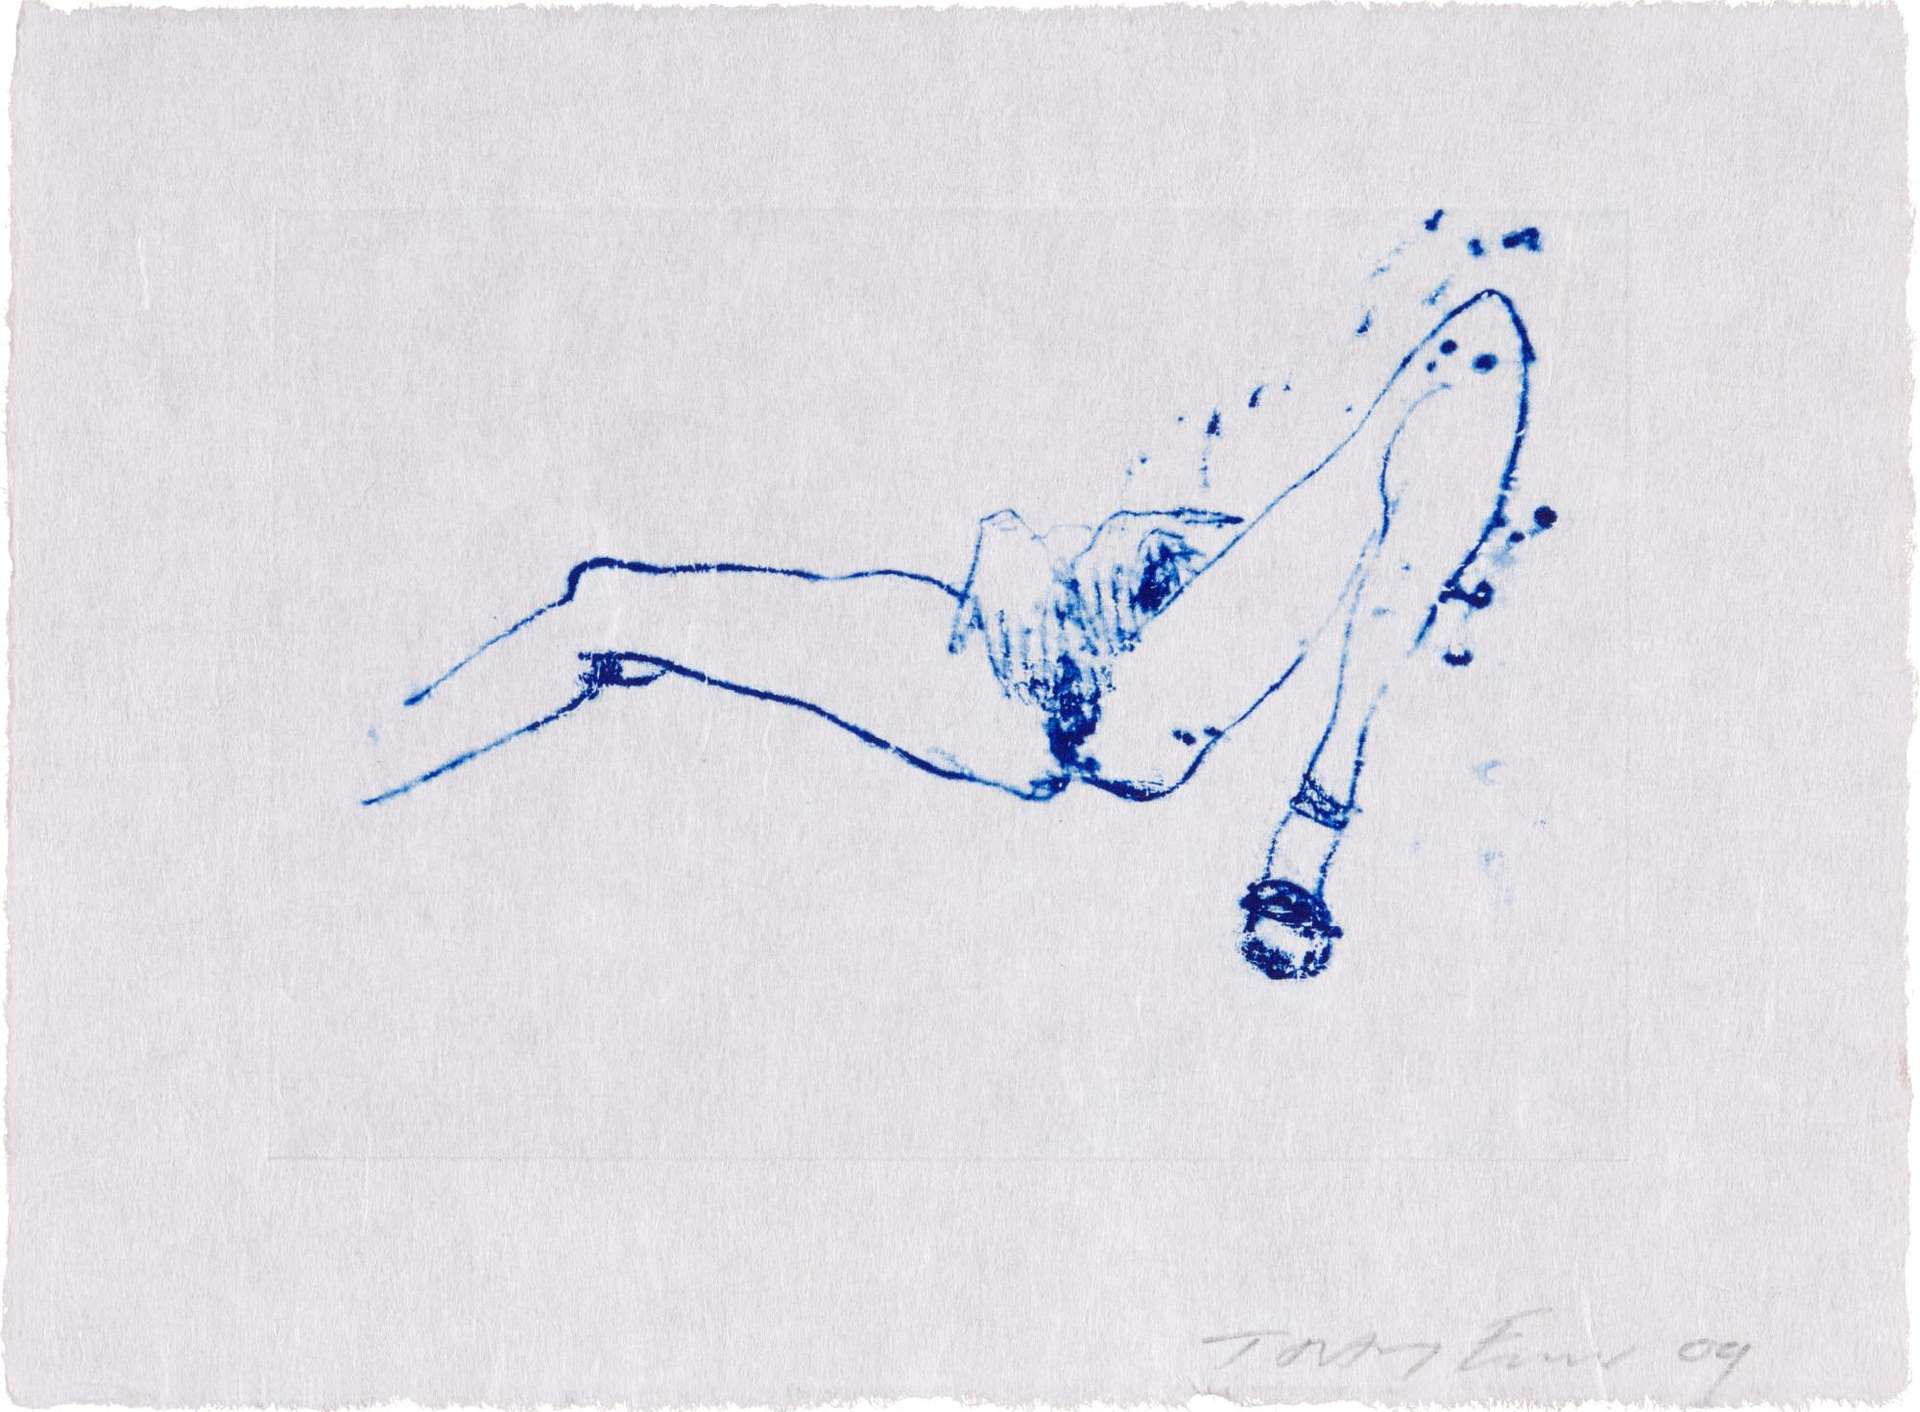 An etching by Tracey Emin depicting a nude form in blue ink in the midst of masturbation.